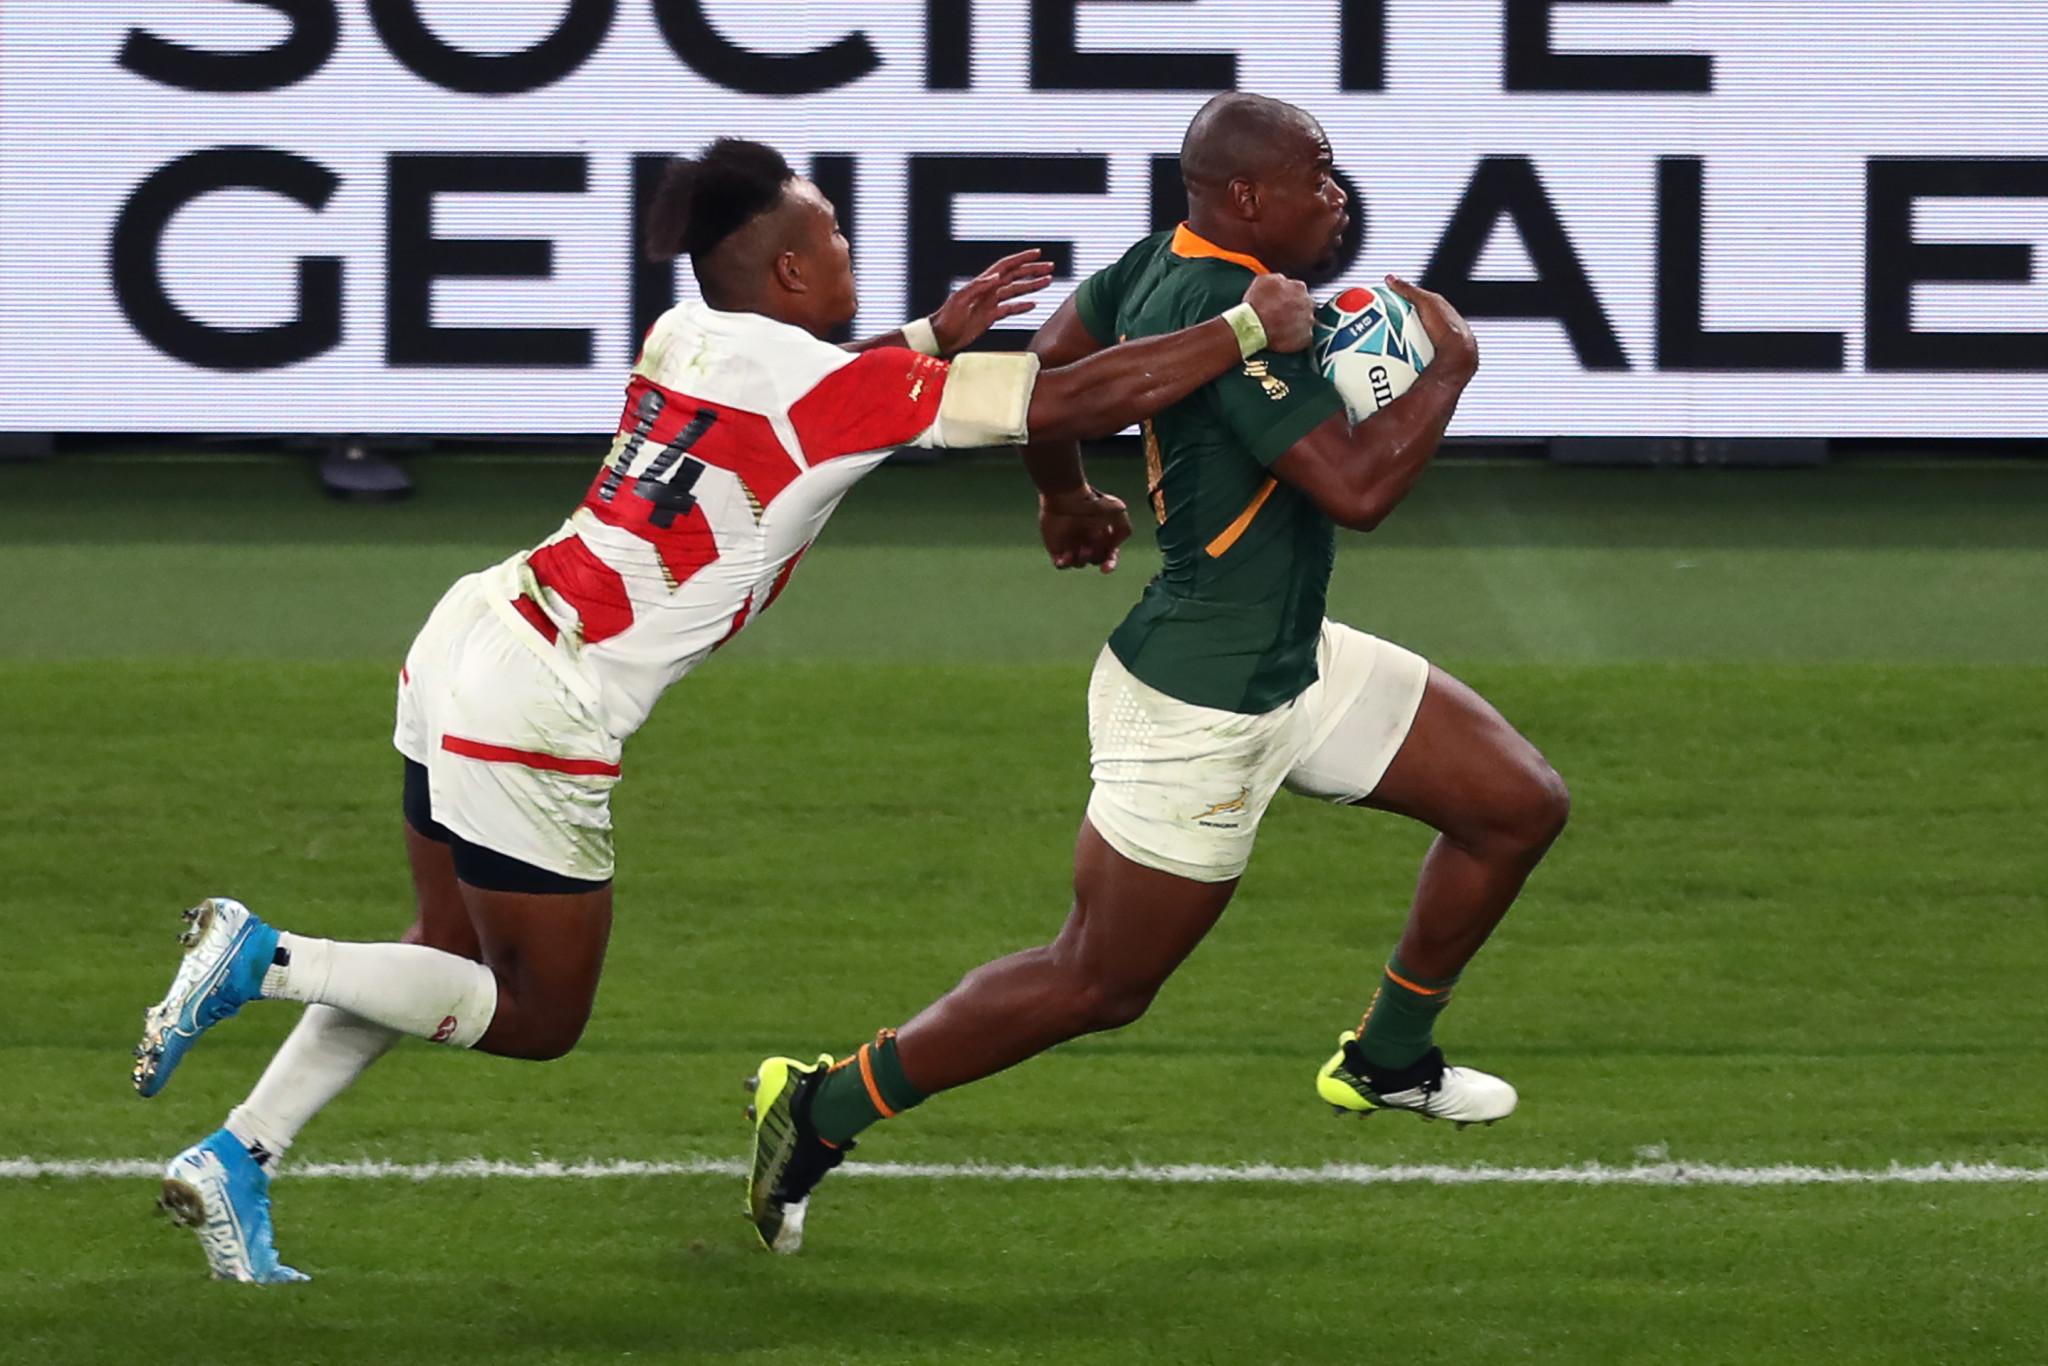 South Africa proved to be too strong for Japan, triumphing 26-3 ©Getty Images